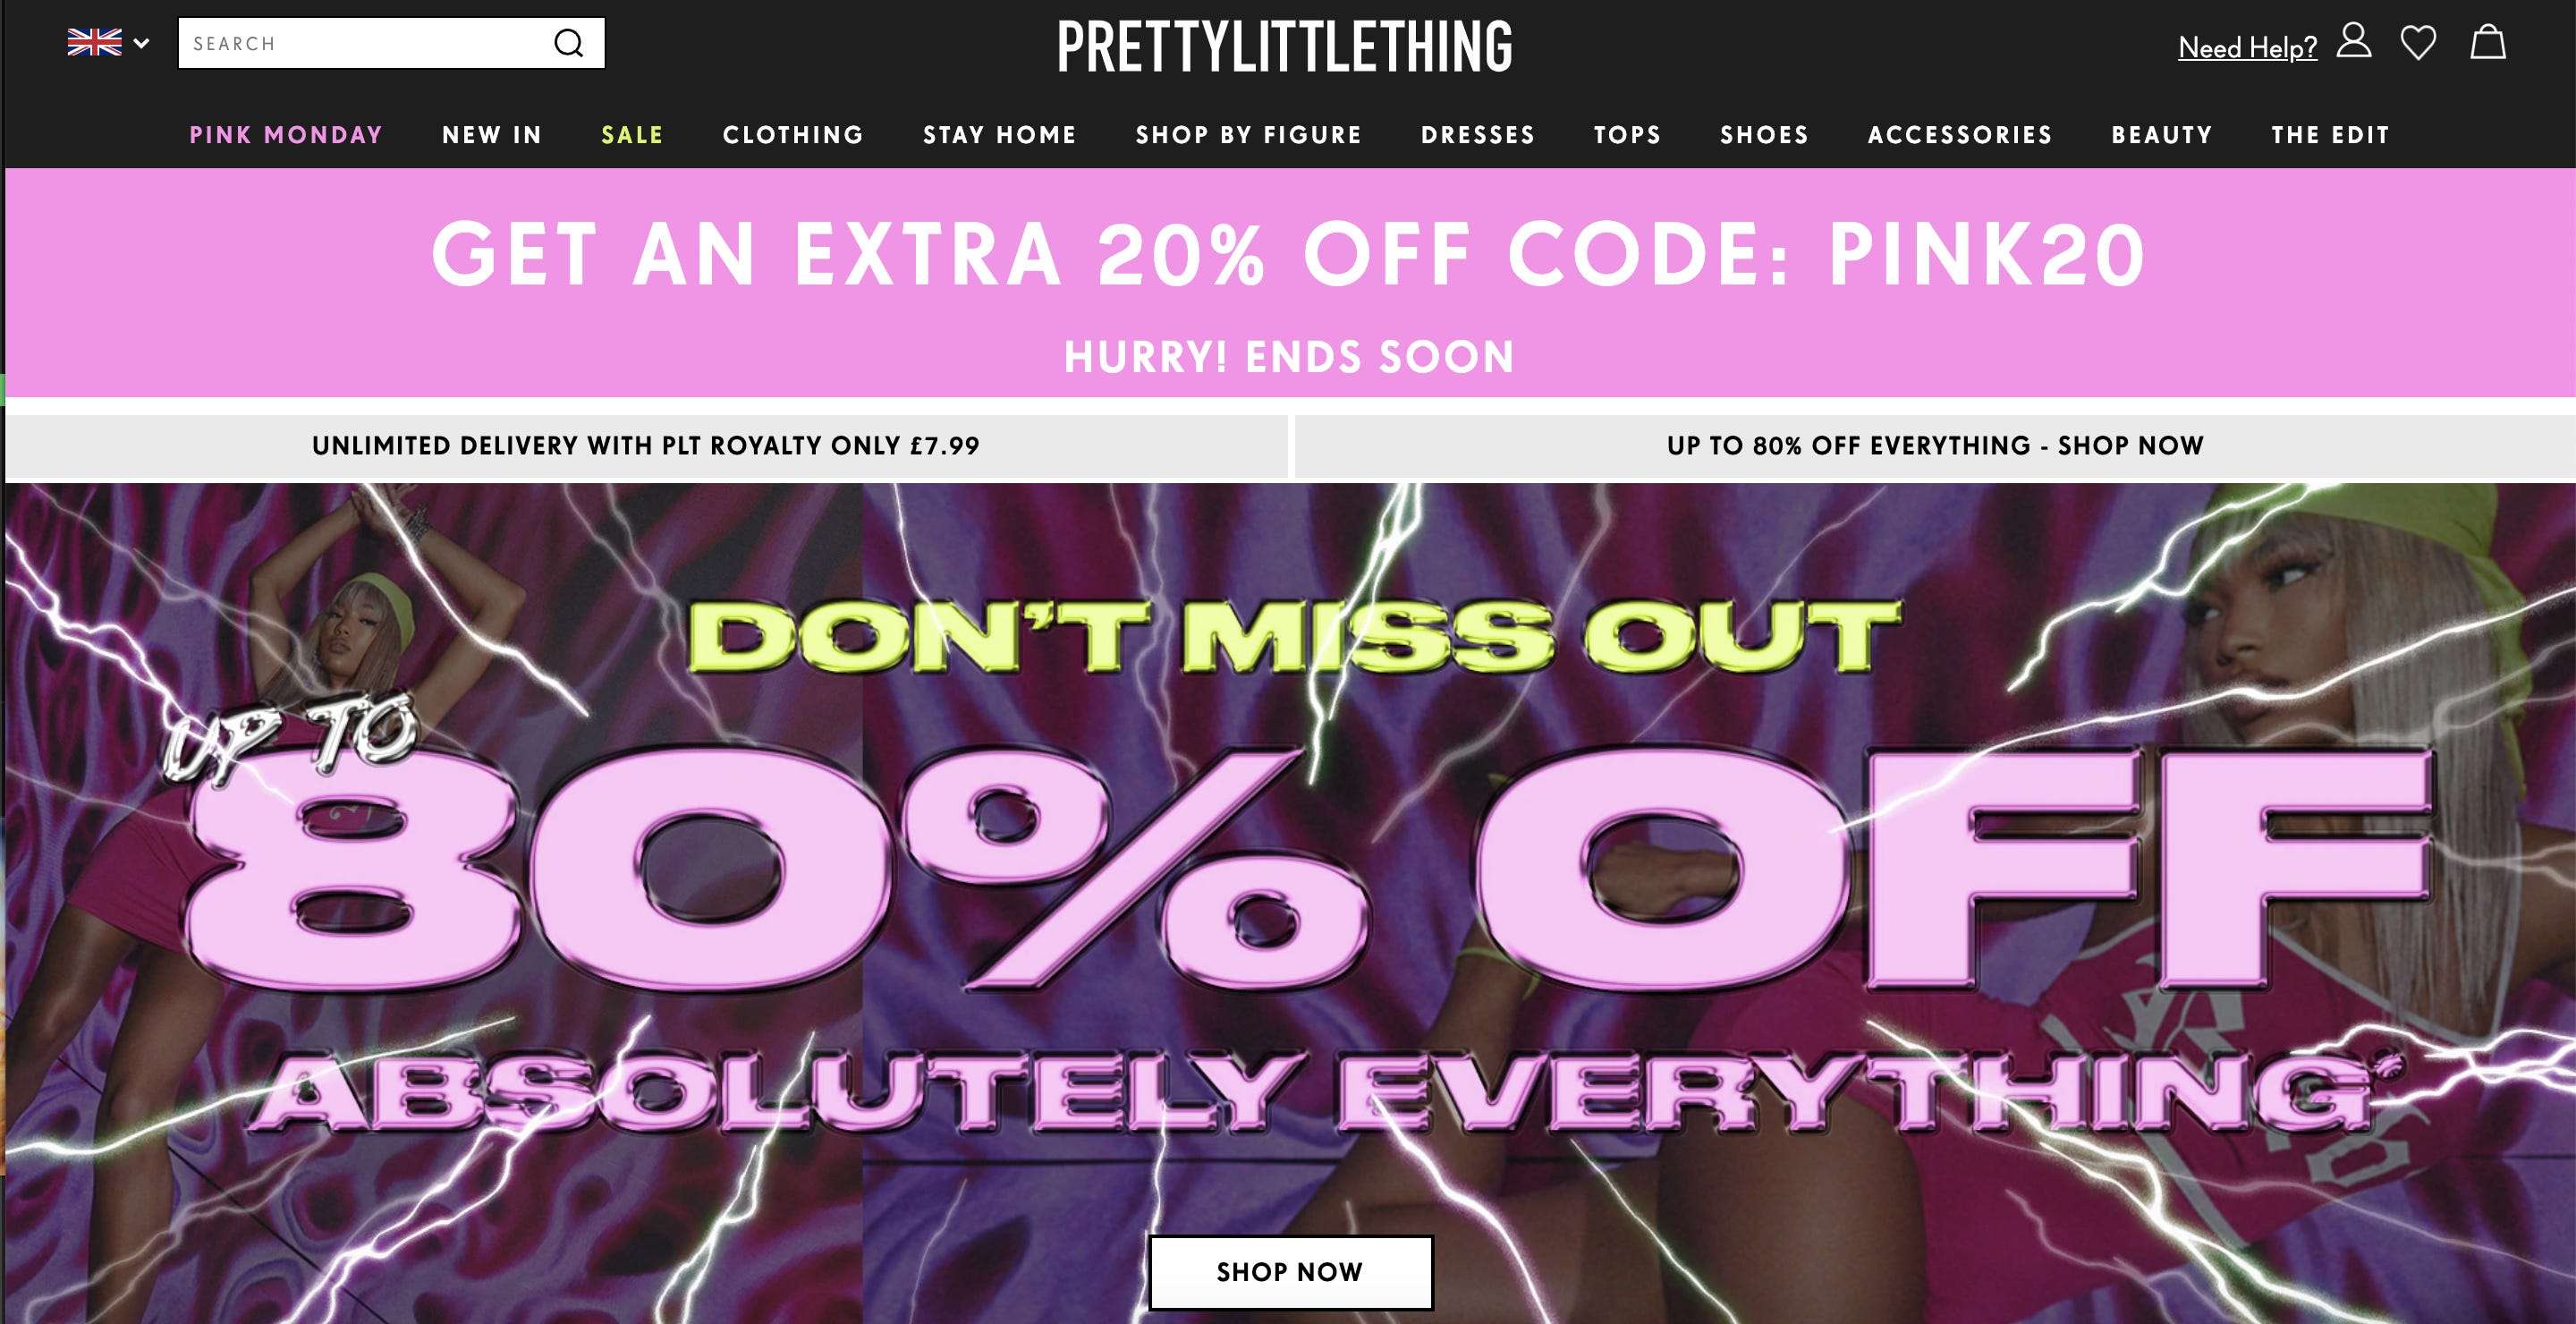 Pretty Little Thing is being criticized for selling clothes for less